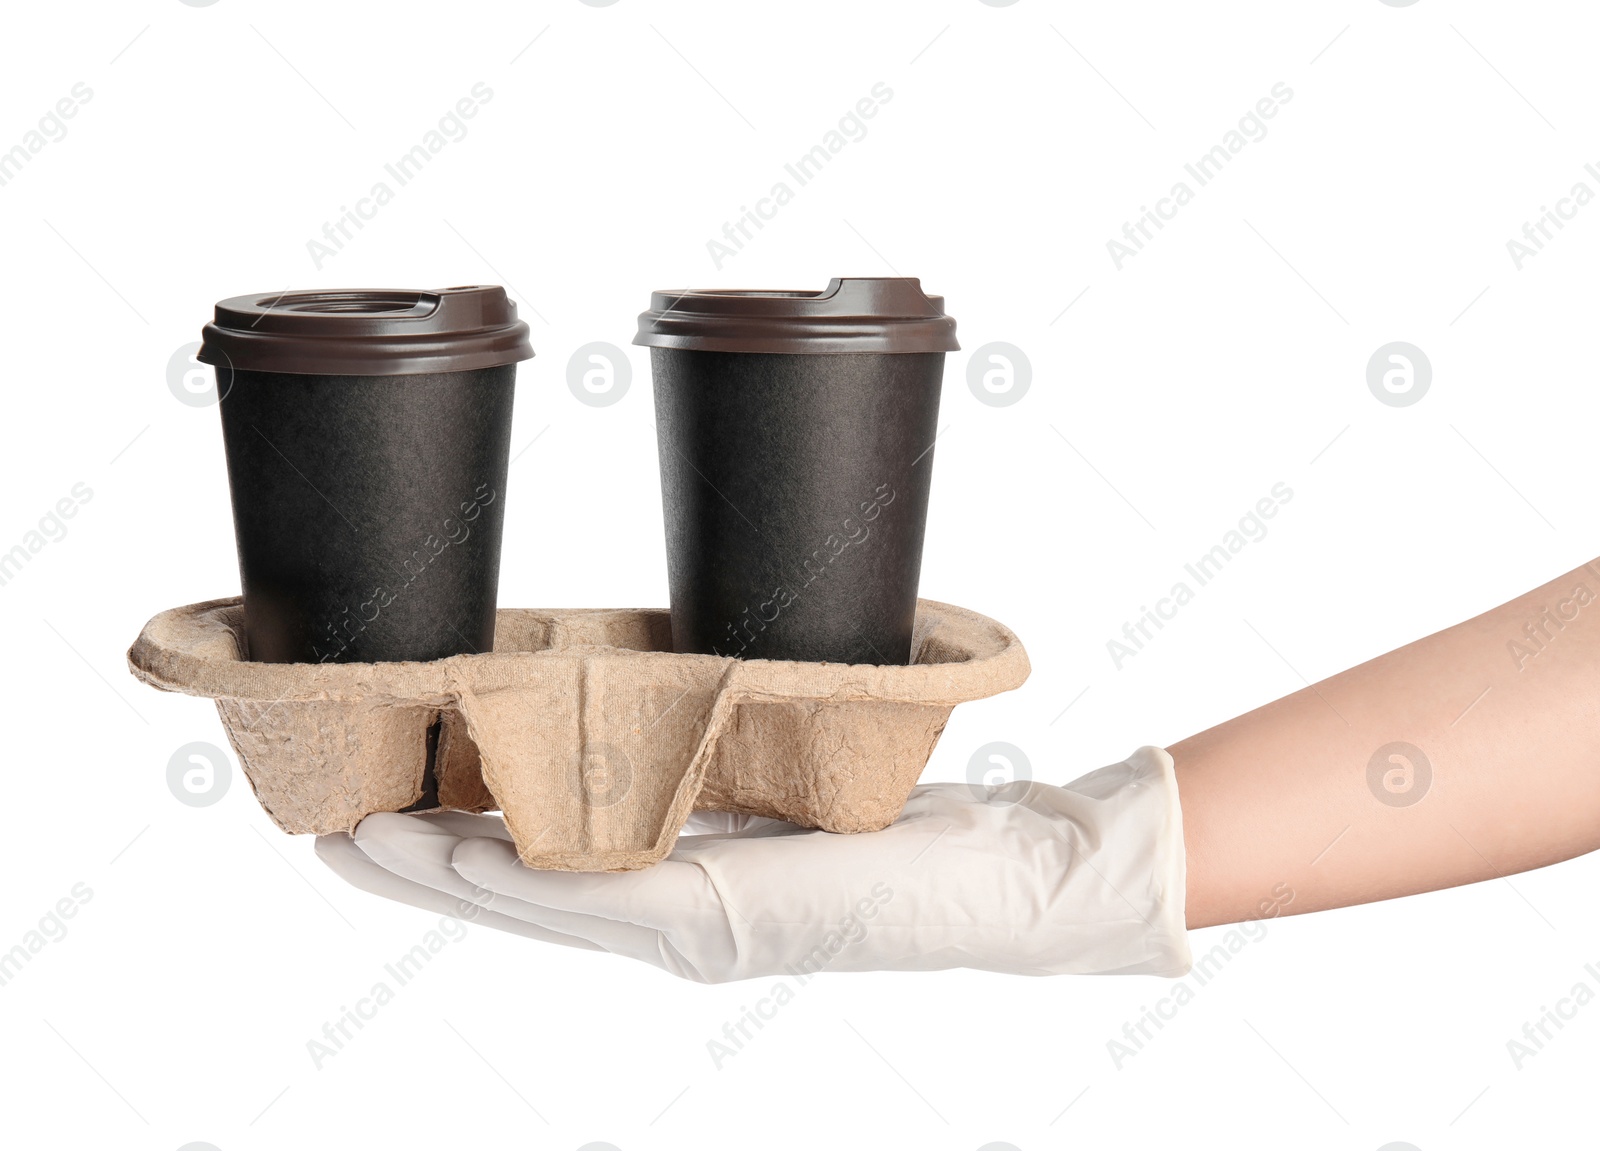 Photo of Woman holding cardboard holder with takeaway paper coffee cups on white background, closeup